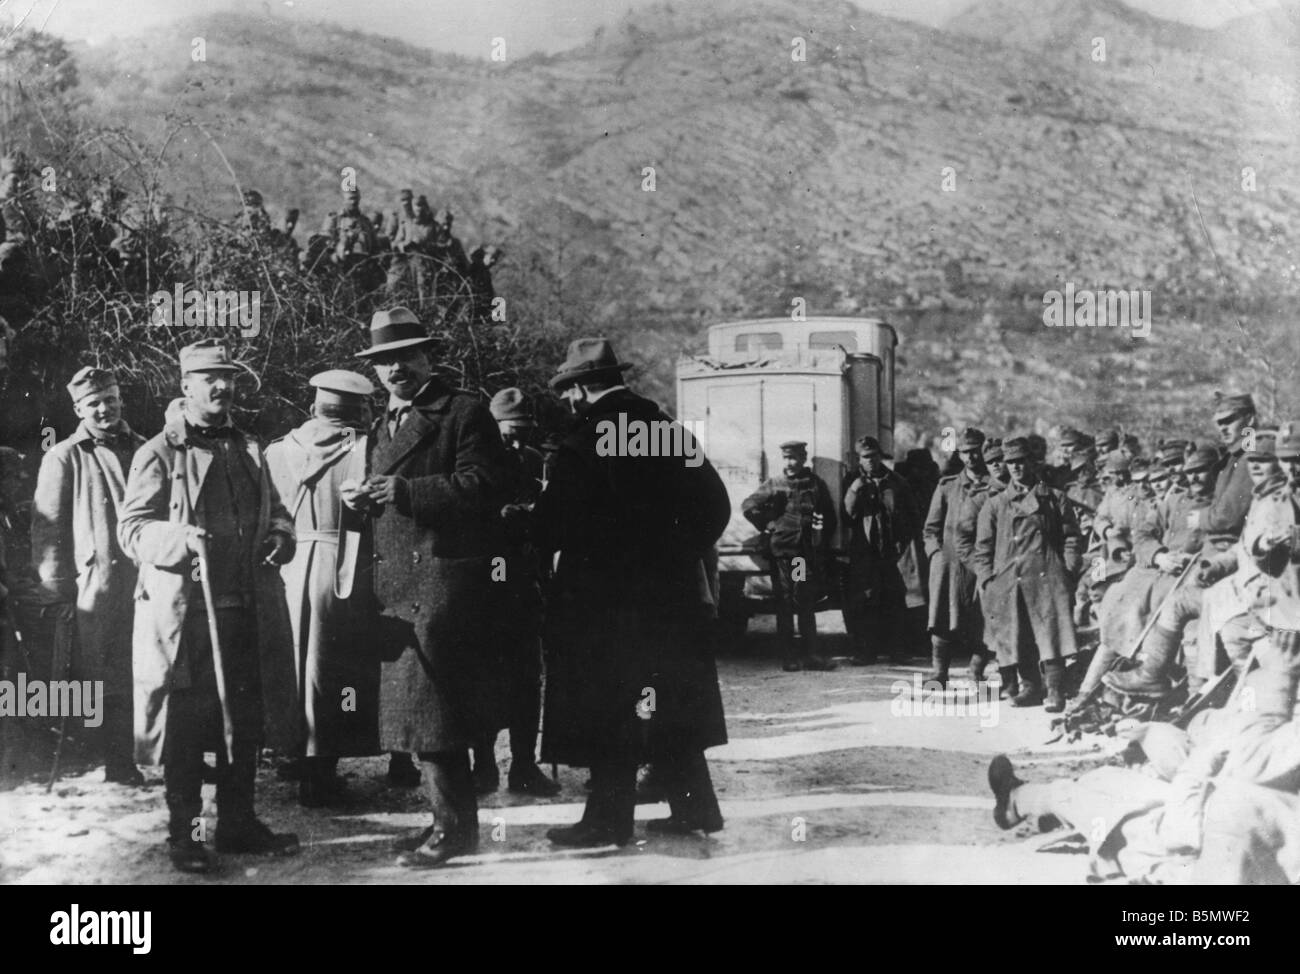 9JG 1916 1 0 A1 Surrender of Montenegrians Jan 1916 Pho World War 1 Advance of Austrian troops in Montenegro fighting on the sid Stock Photo